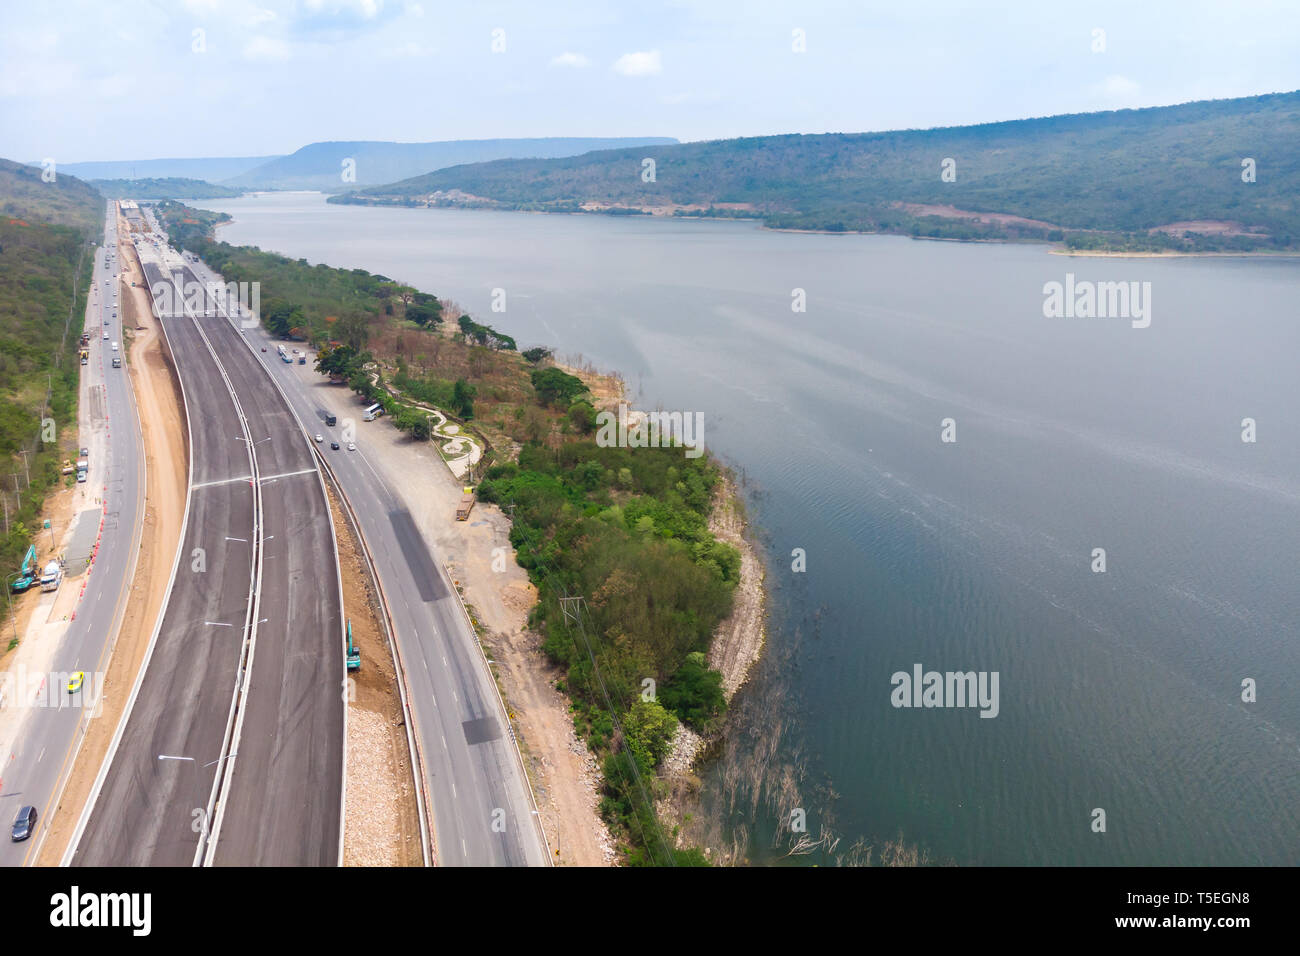 Drone shot aerial view landscape of under construction motorway tolls near big natural river Stock Photo